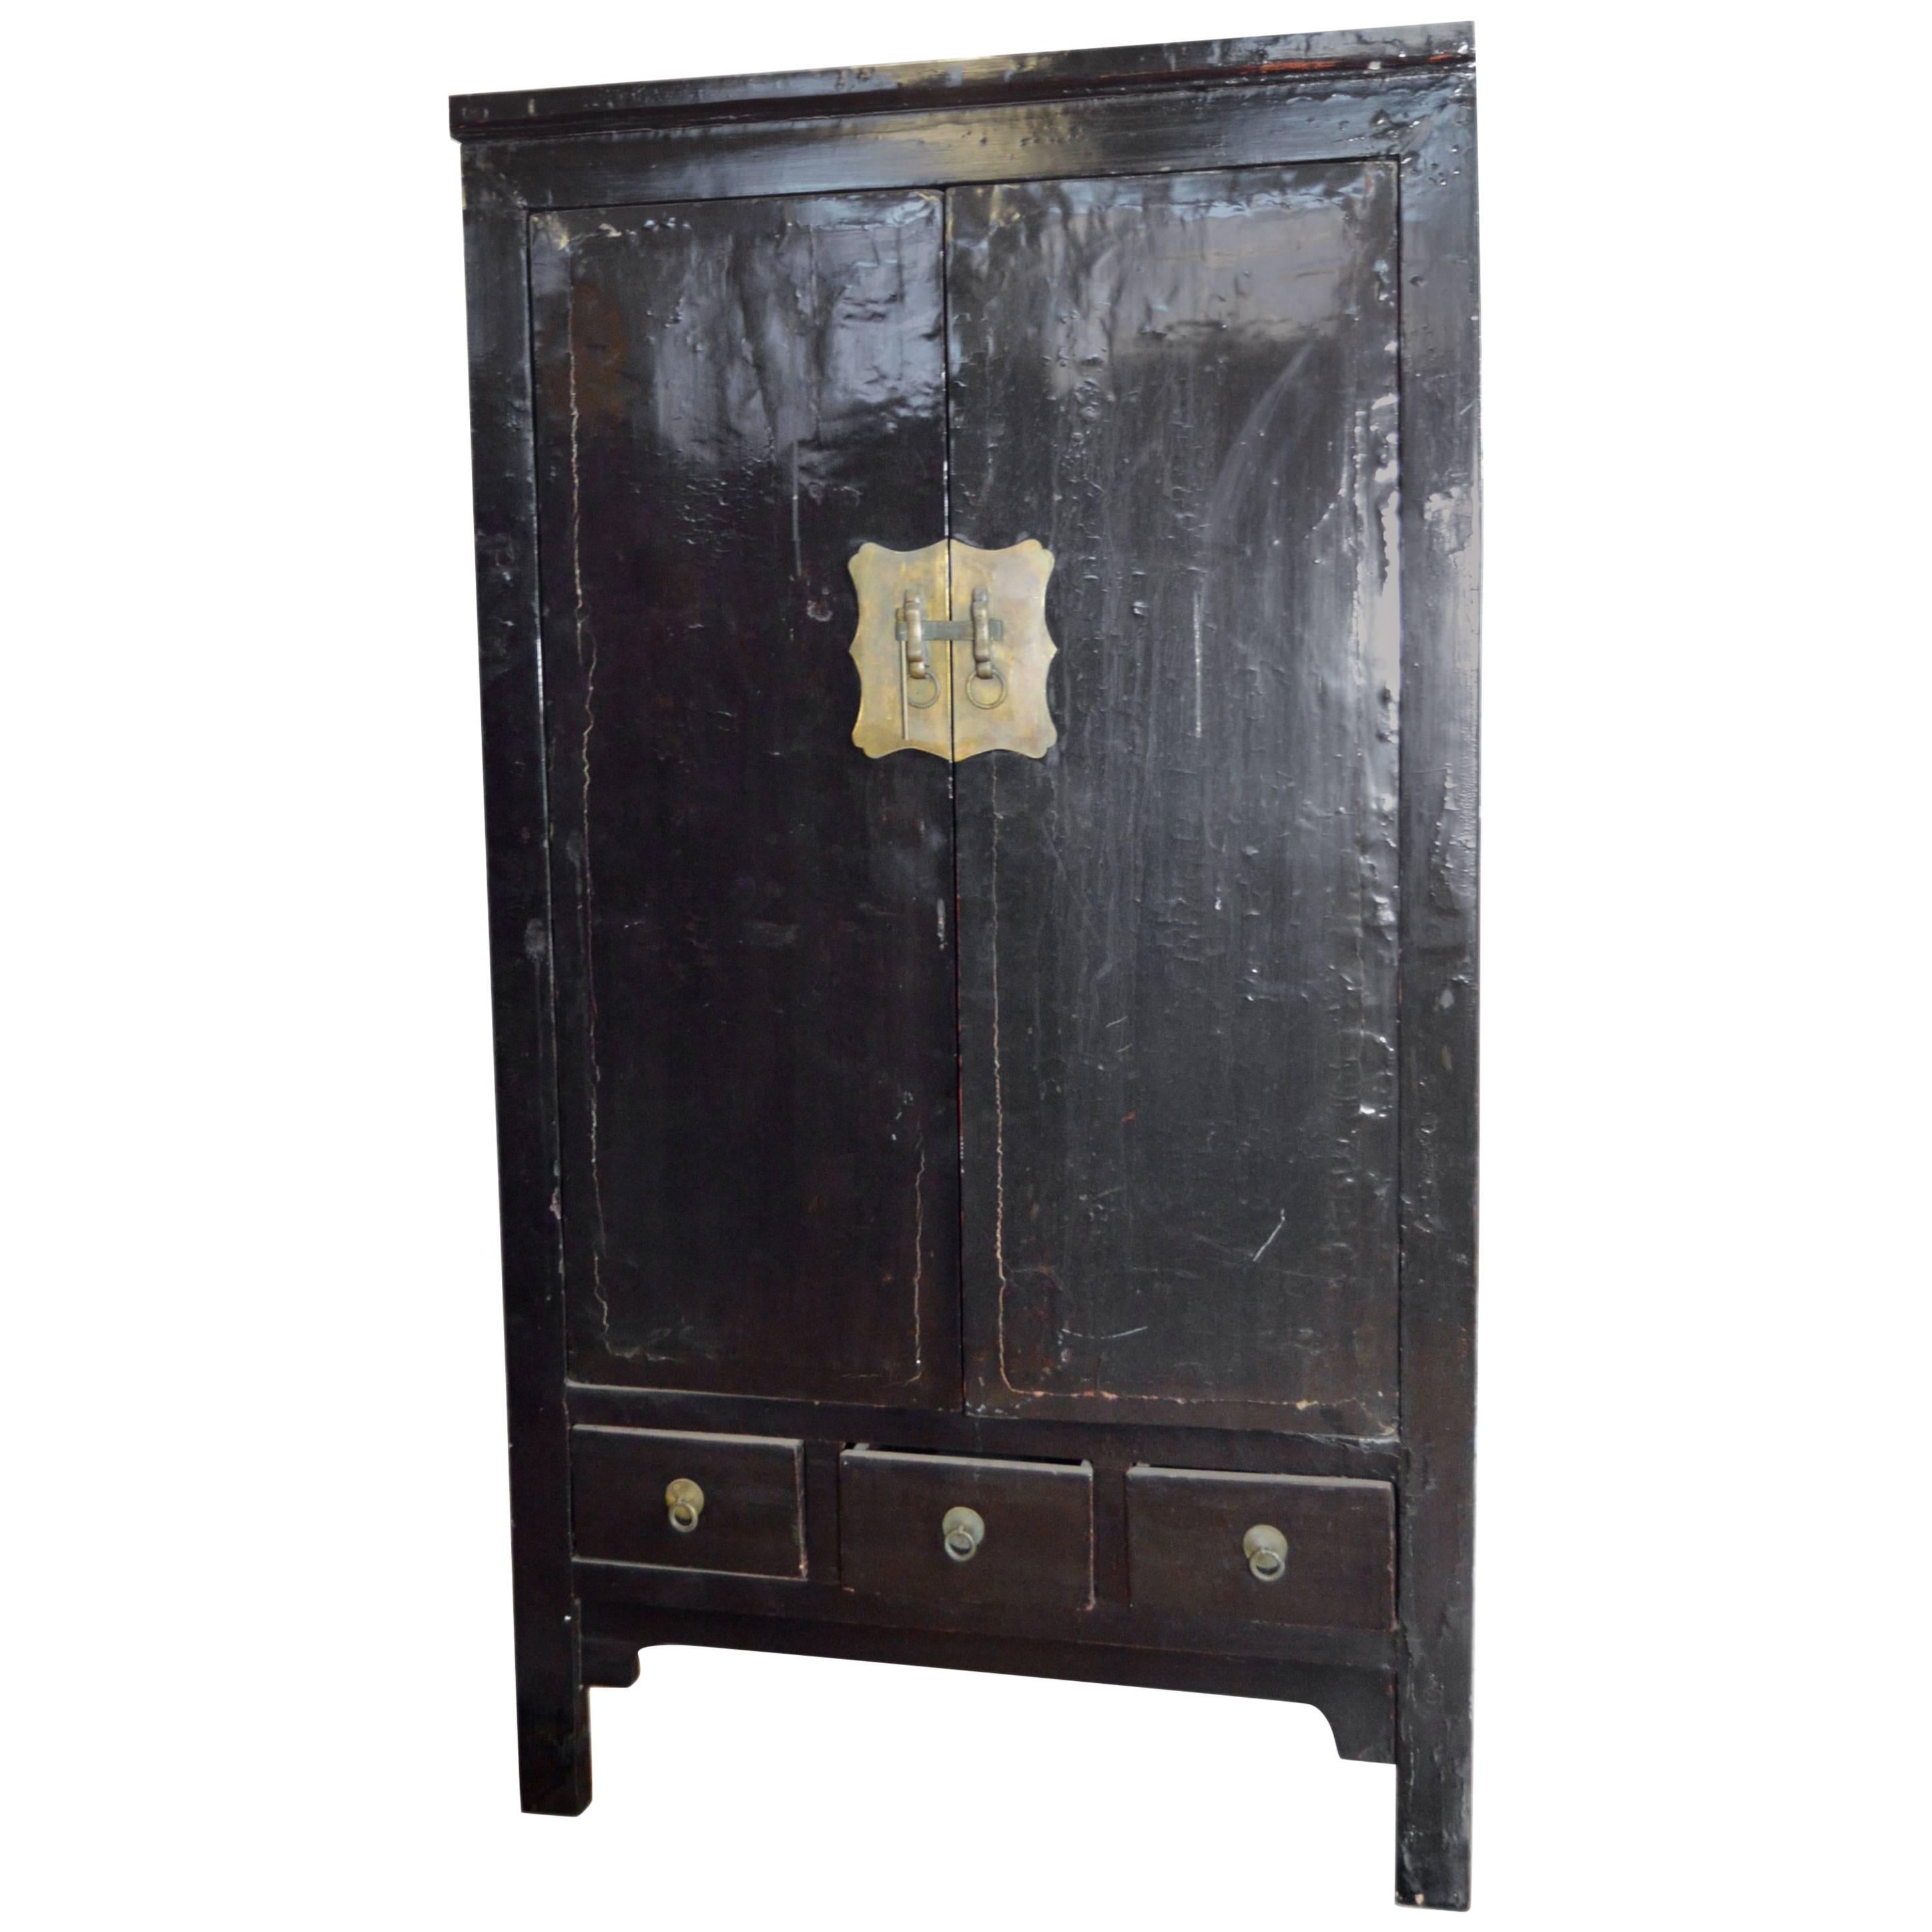 Early 19th Century Chinese Black Lacquered Wardrobe with Drawers and Shelves